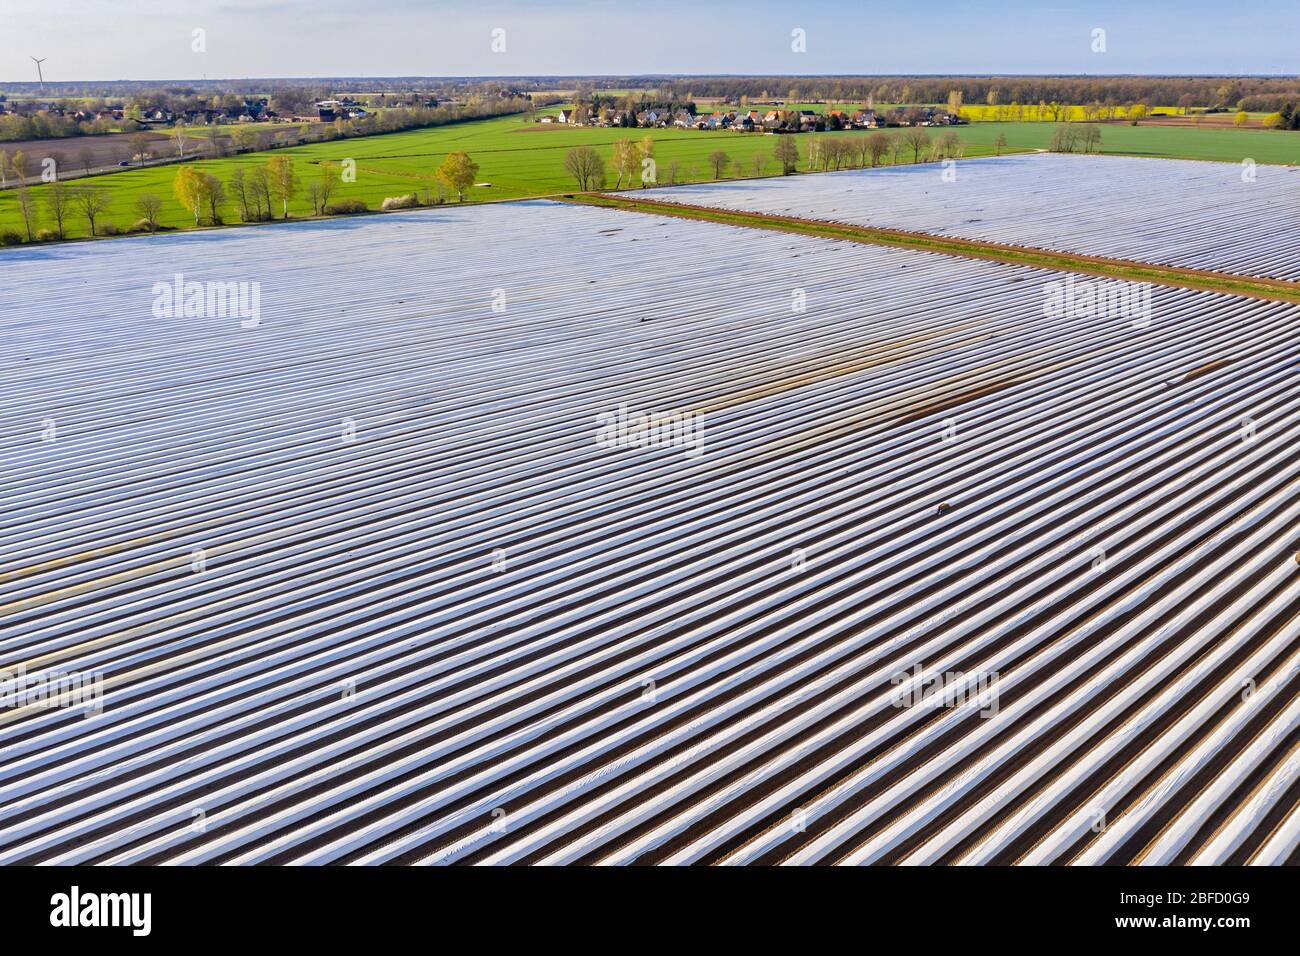 Asparagus fields near village Bröckel, rows covered with plastic foil, Lower Saxony, Germany Stock Photo